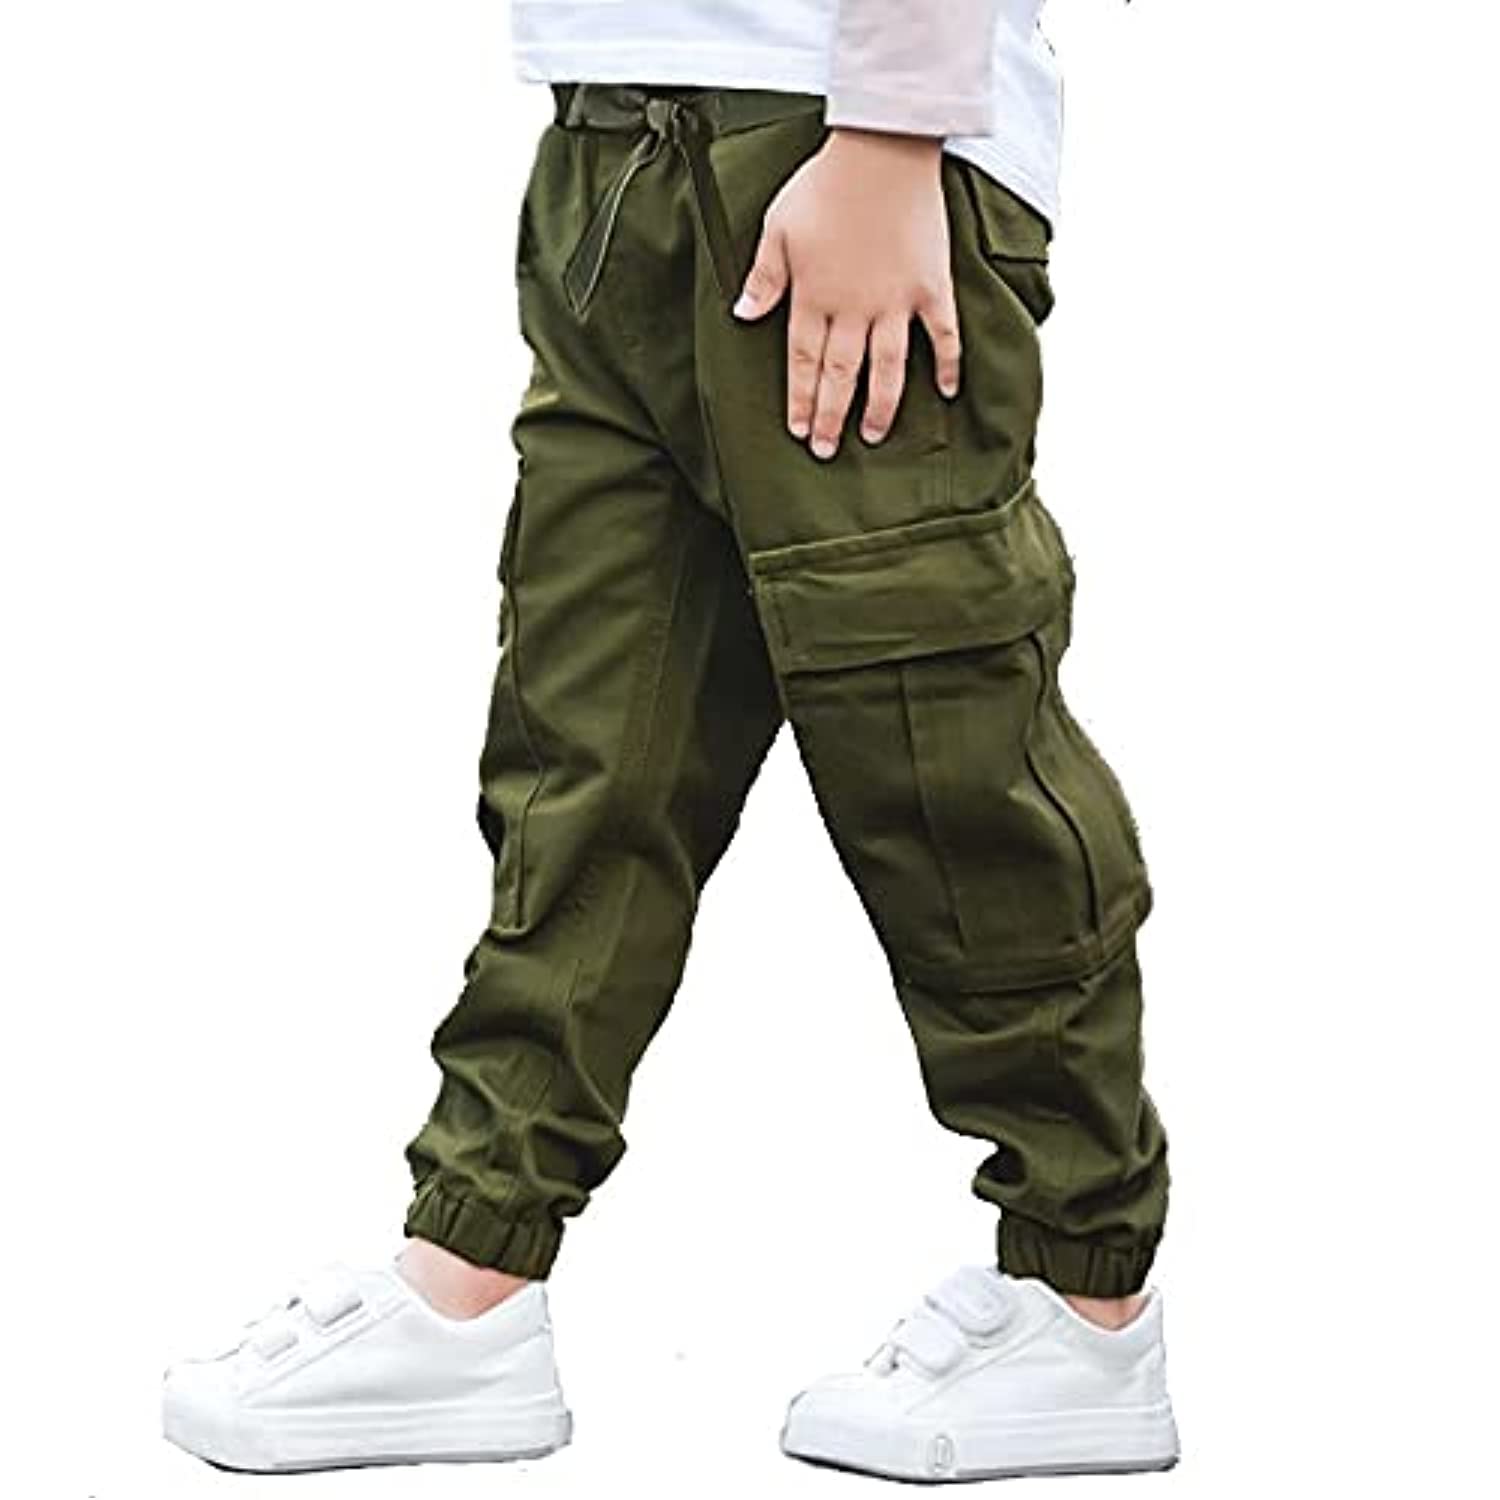 Buggy Drawstring Pants for children 12-14 years old - olive color Color Green Size 12-14 Years